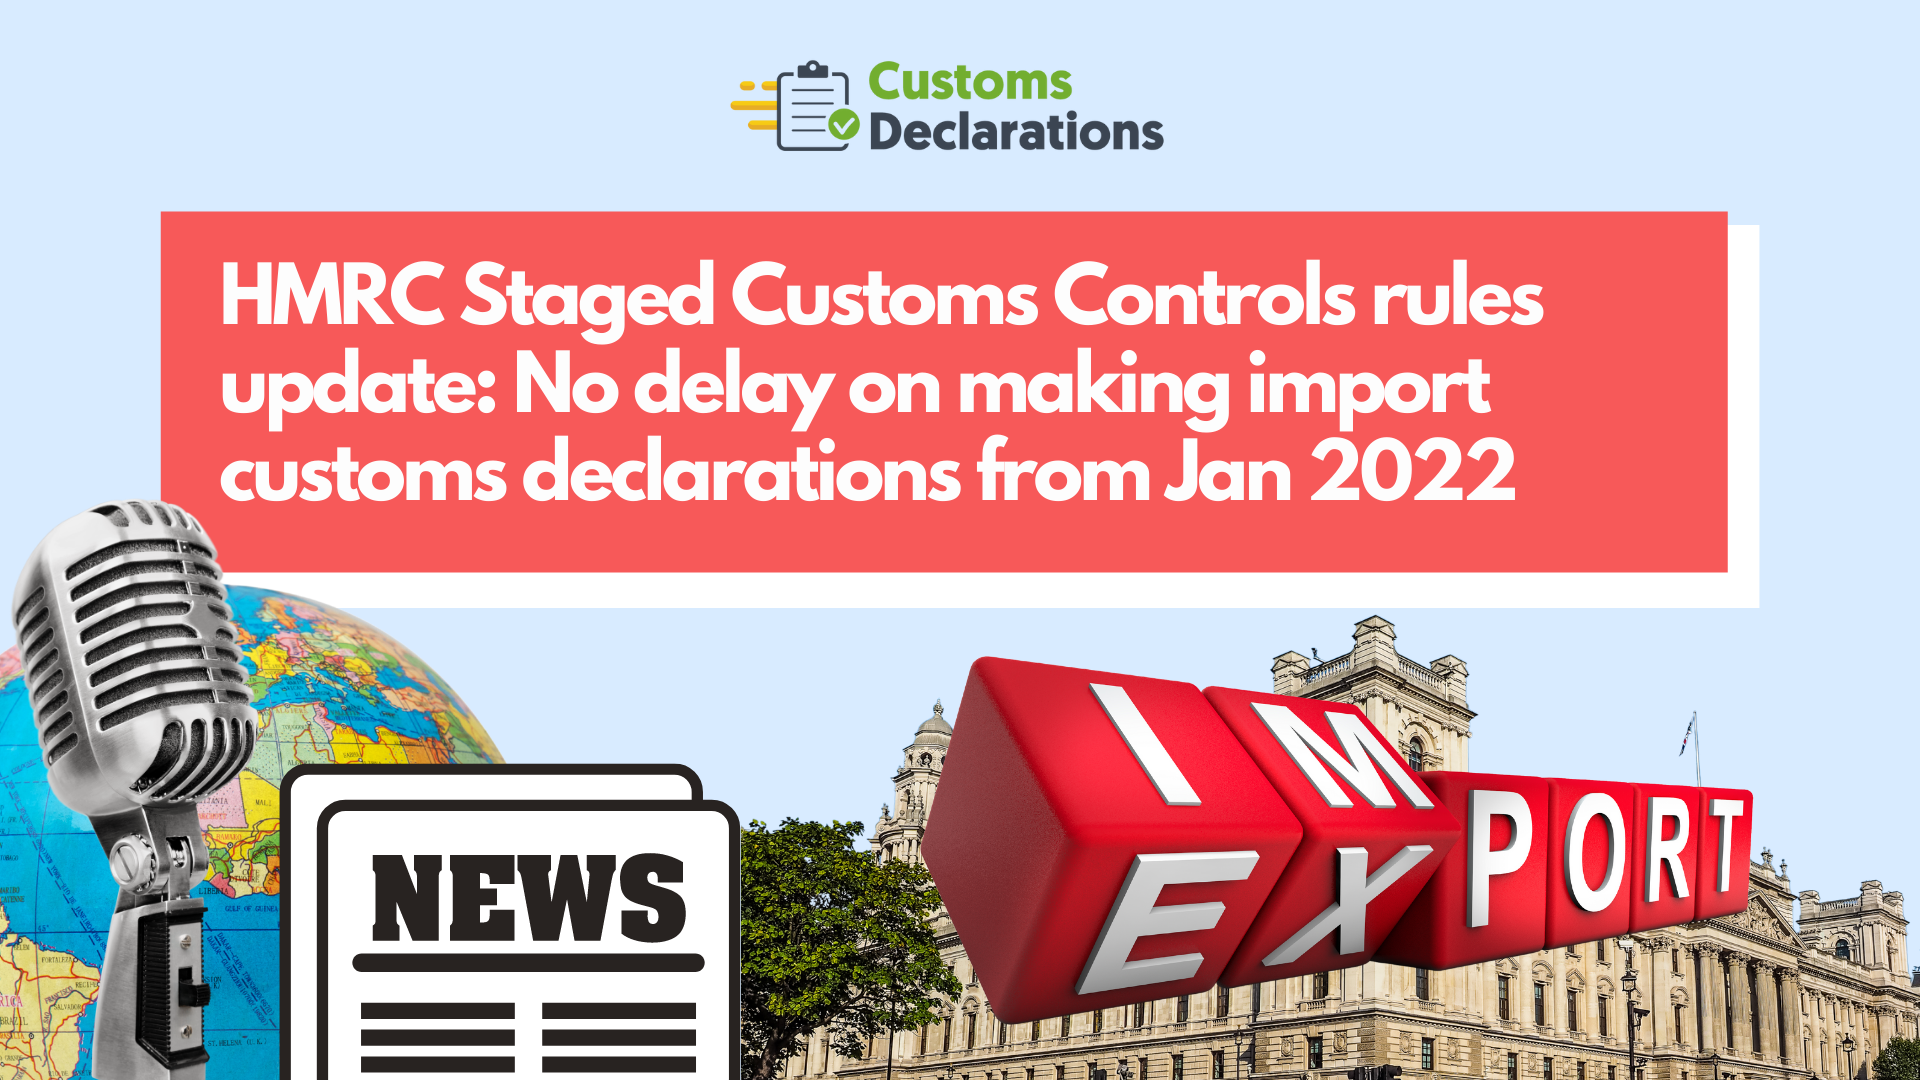 HMRC Staged Customs Controls rules